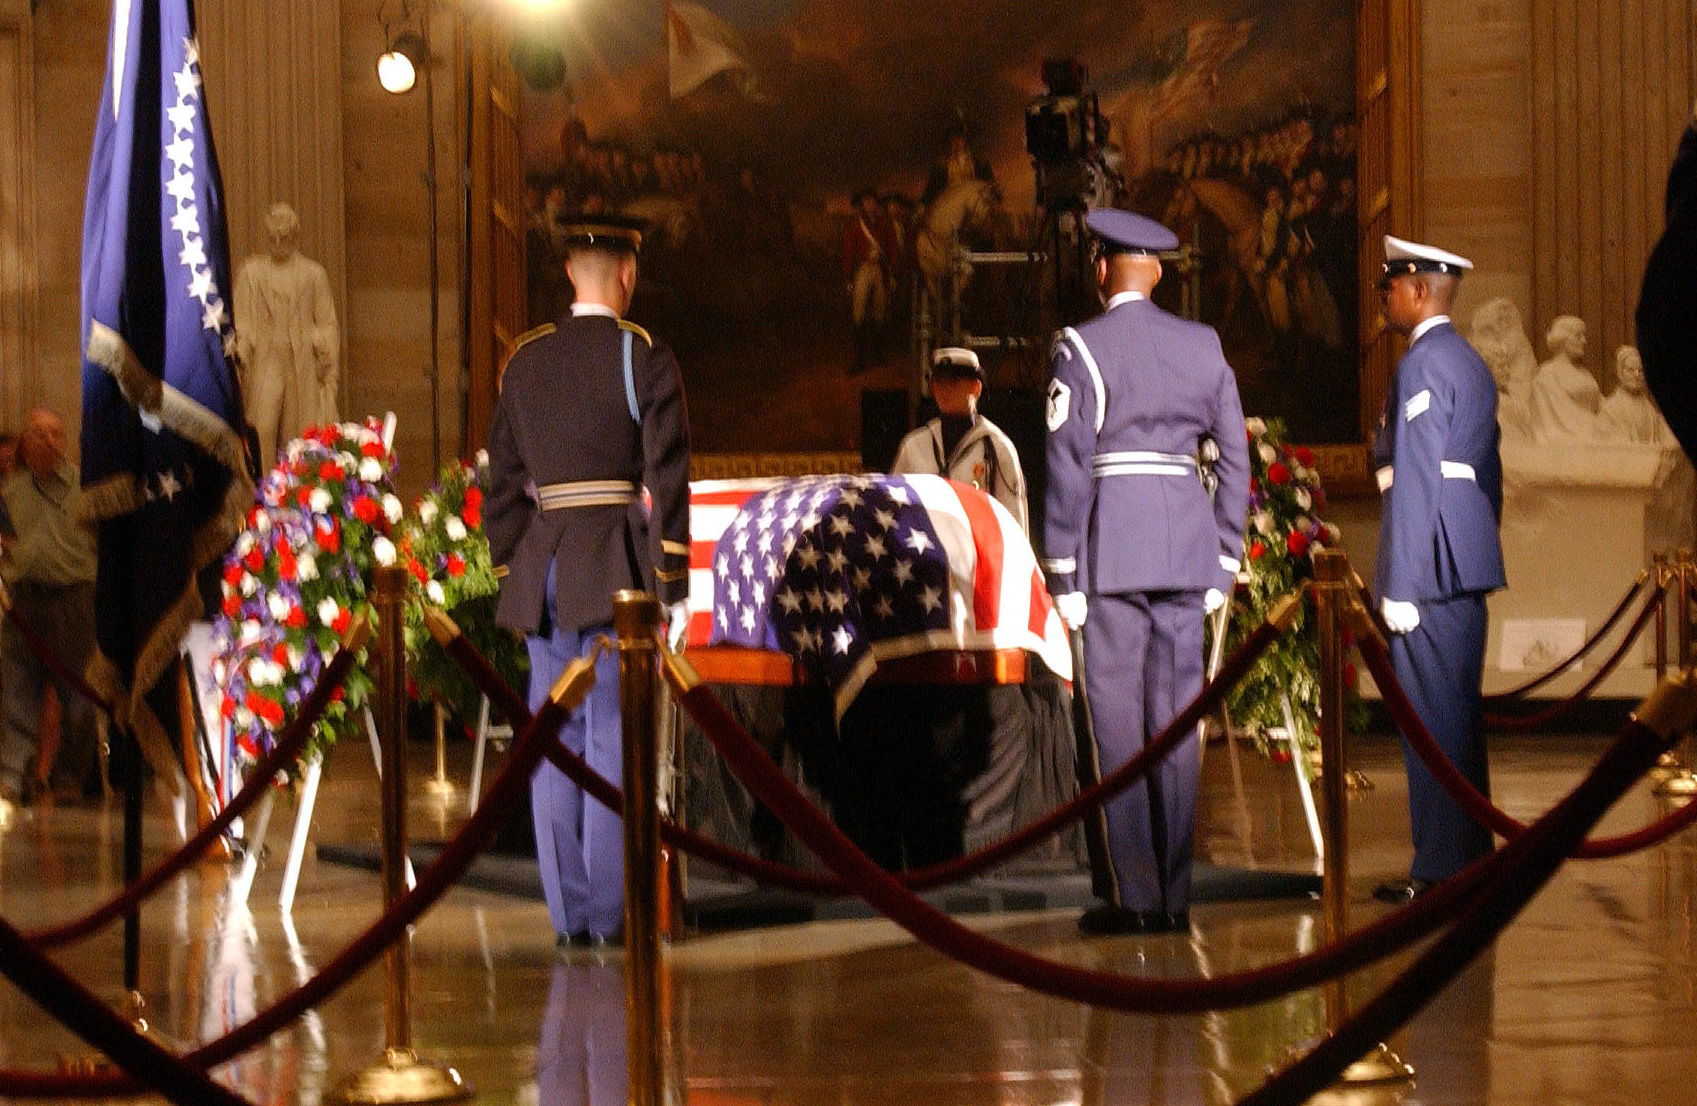 US_Navy_040609-A-8024C-018_Ceremonial_Honor_Guard_stand_watch_over_the_flag-draped_casket_of_former_President_Ronald_Reagan_during_his_State_Funeral_in_the_U.S._Capitol_Rotunda_(cropped).jpg